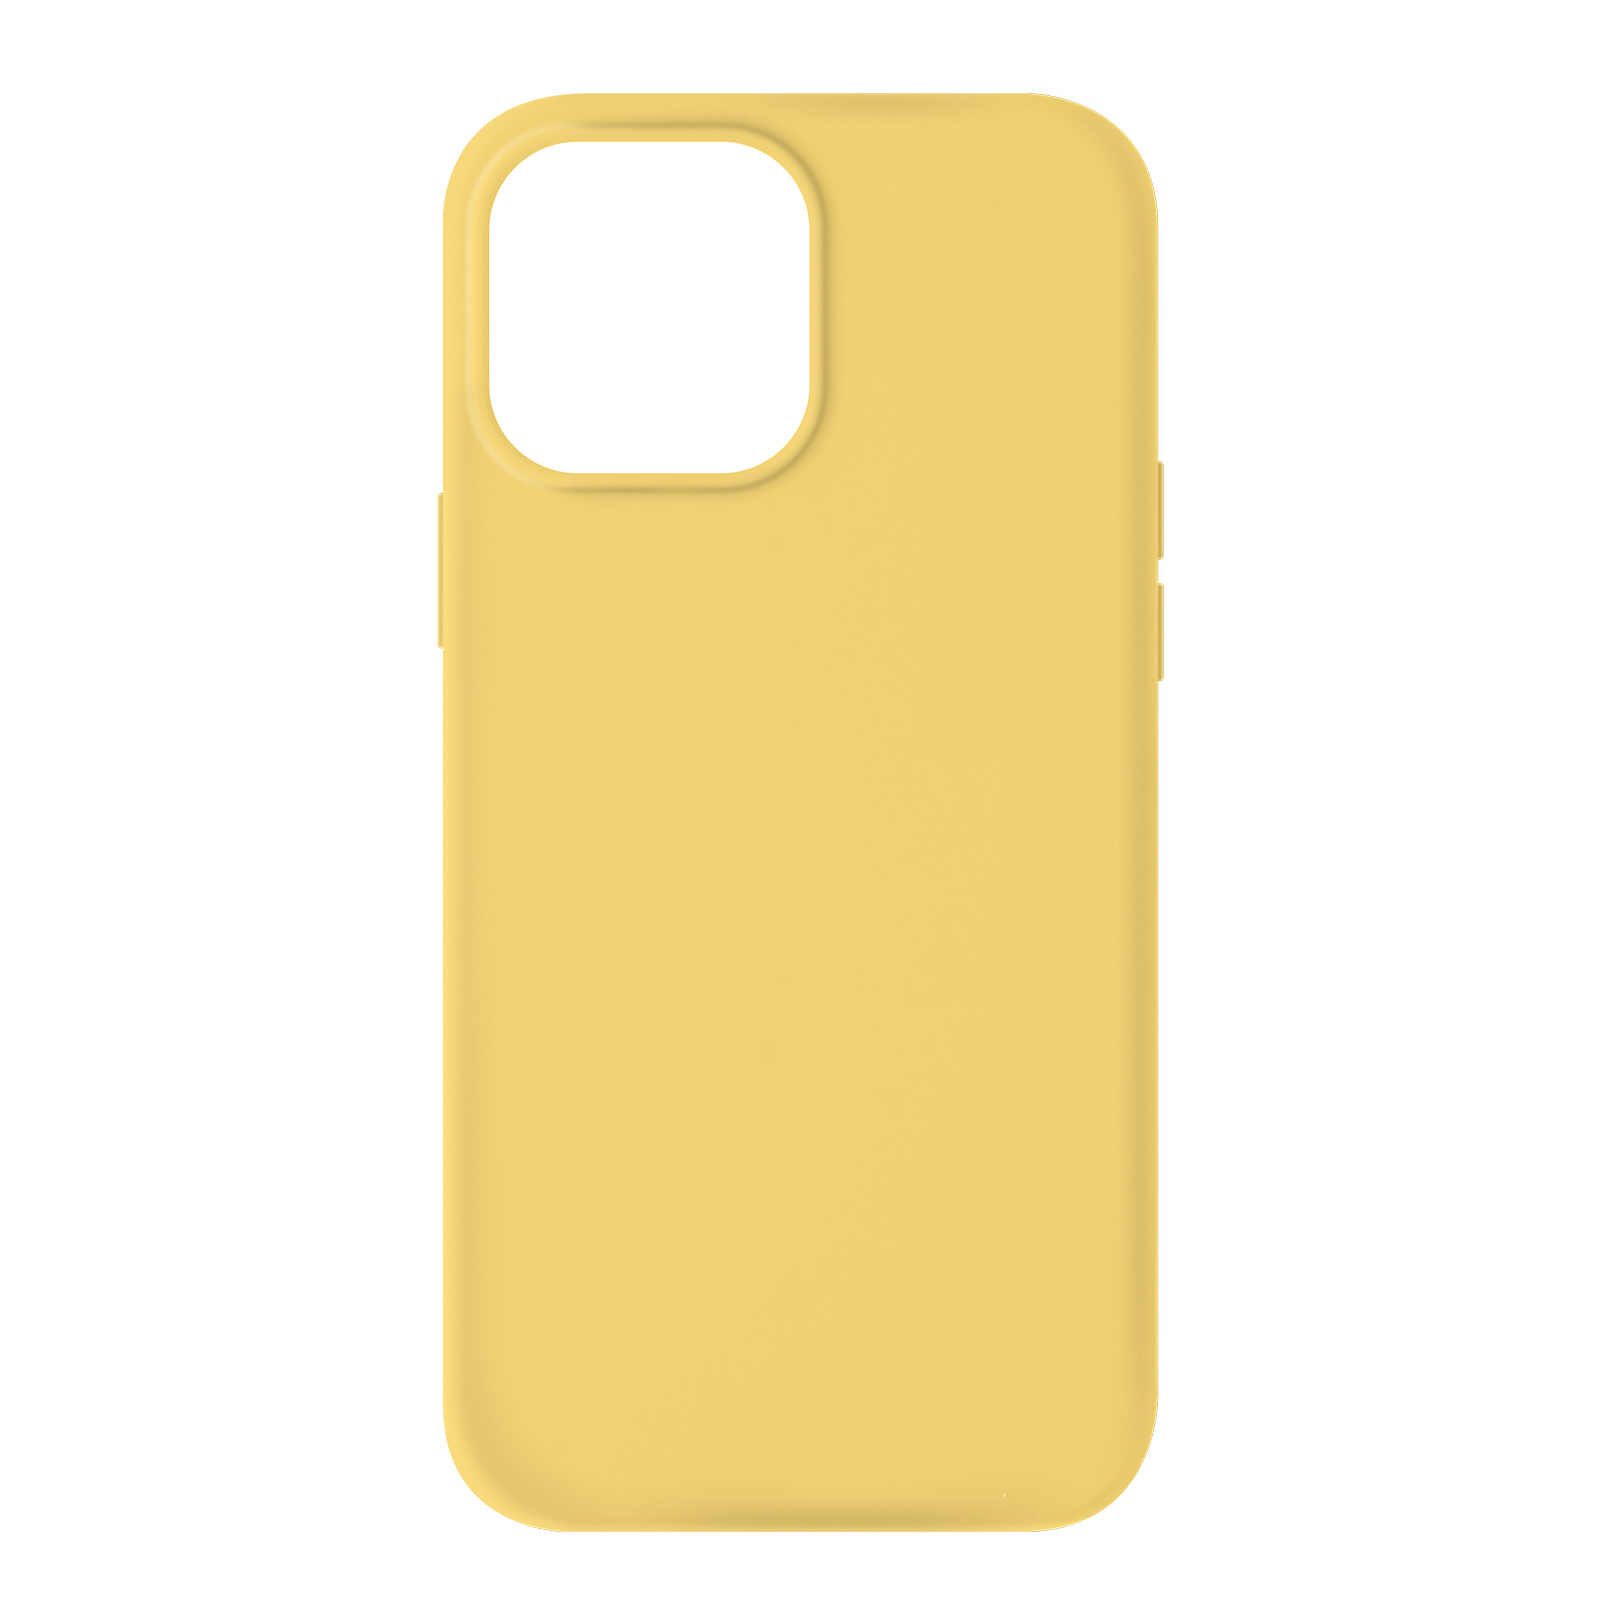 Max, Pro Gelb AVIZAR 13 Backcover, Apple, iPhone Likid Series,